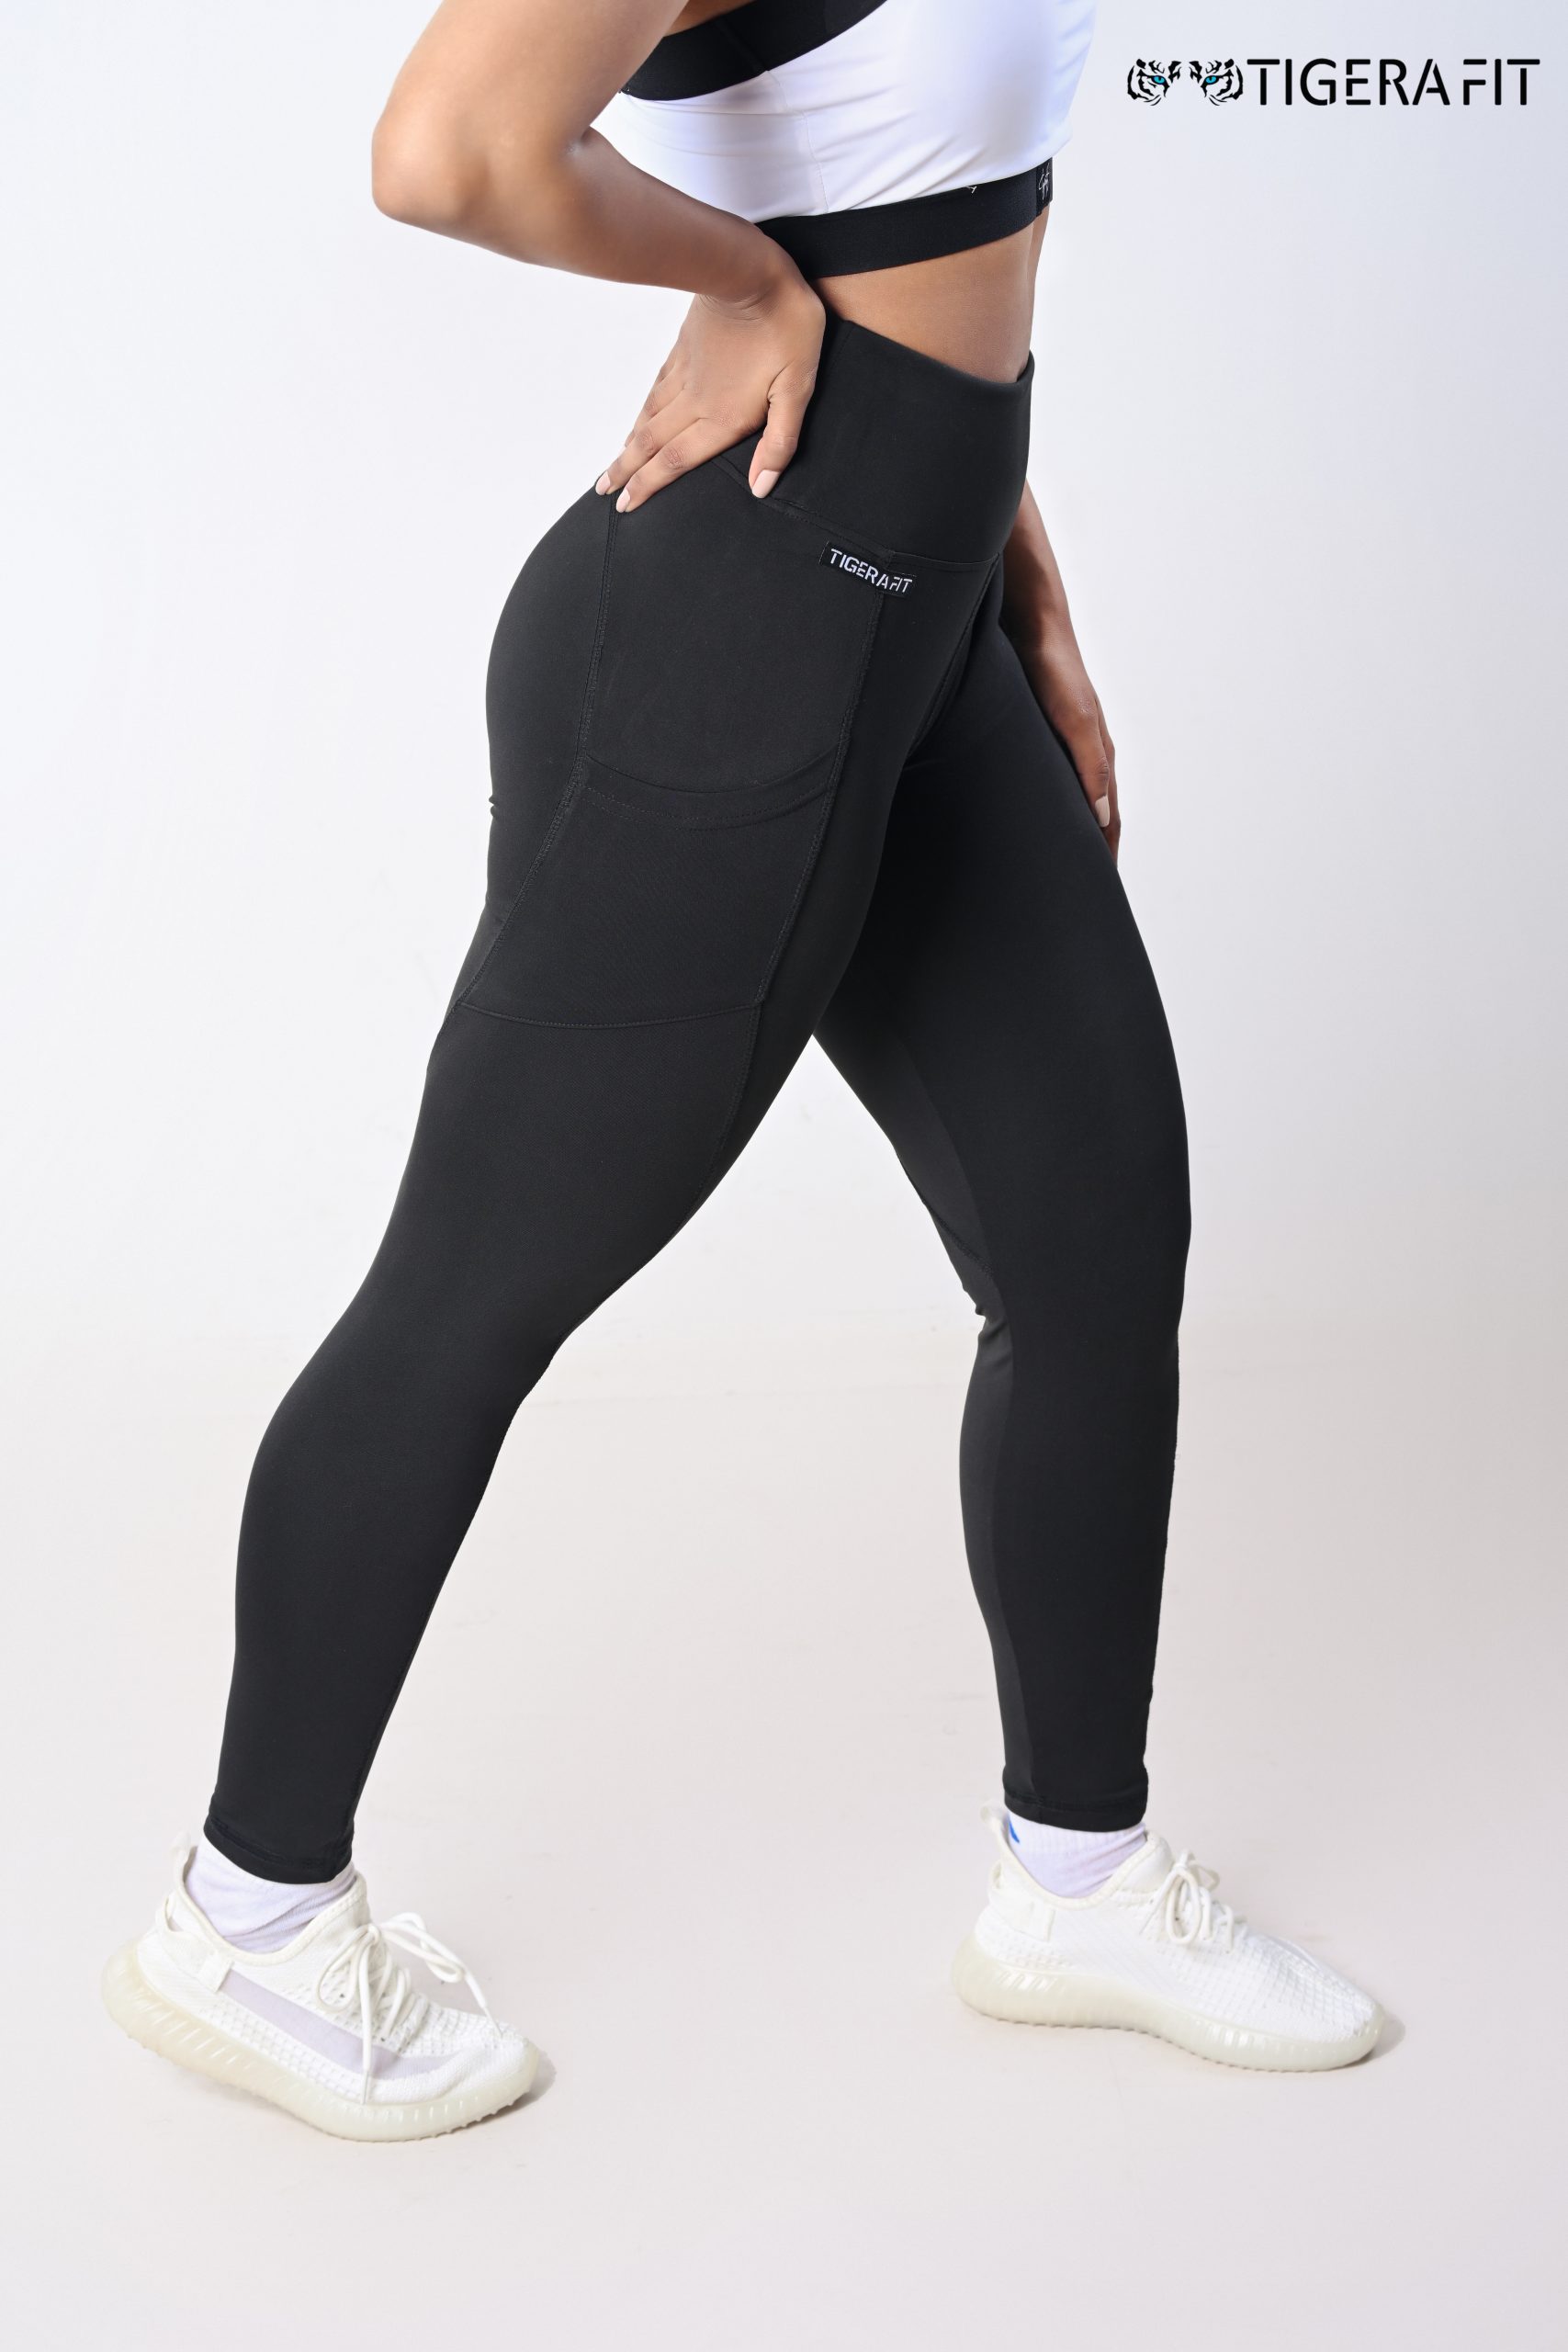 Absolute-Fit White Side Stripe Leggings with Secure Tie (Black)